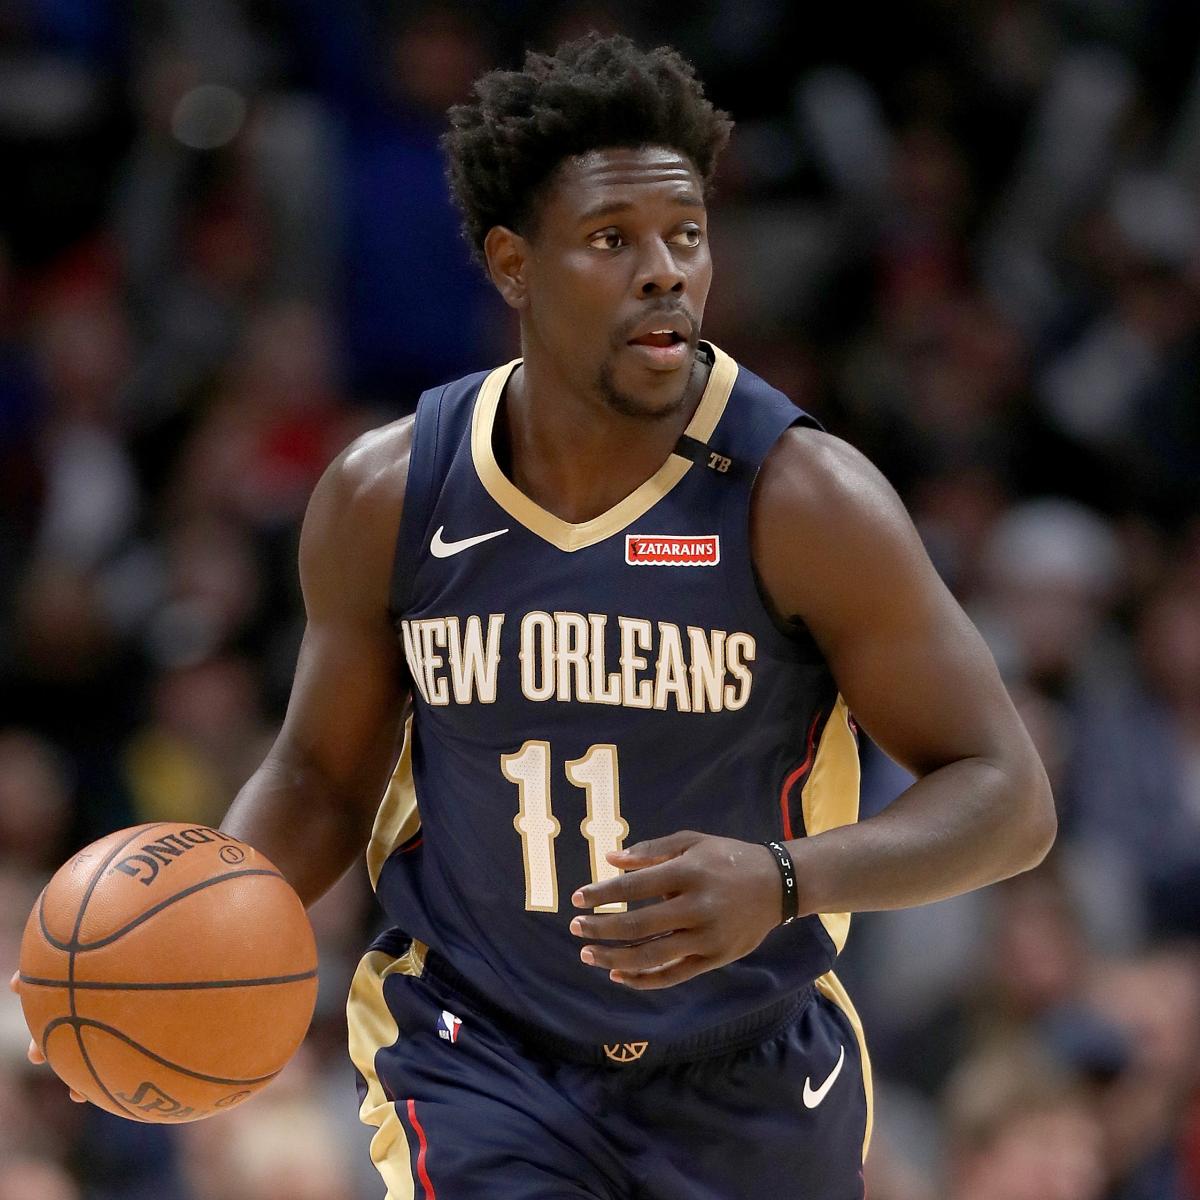 The New Orleans Pelicans should retire Jrue Holiday's number